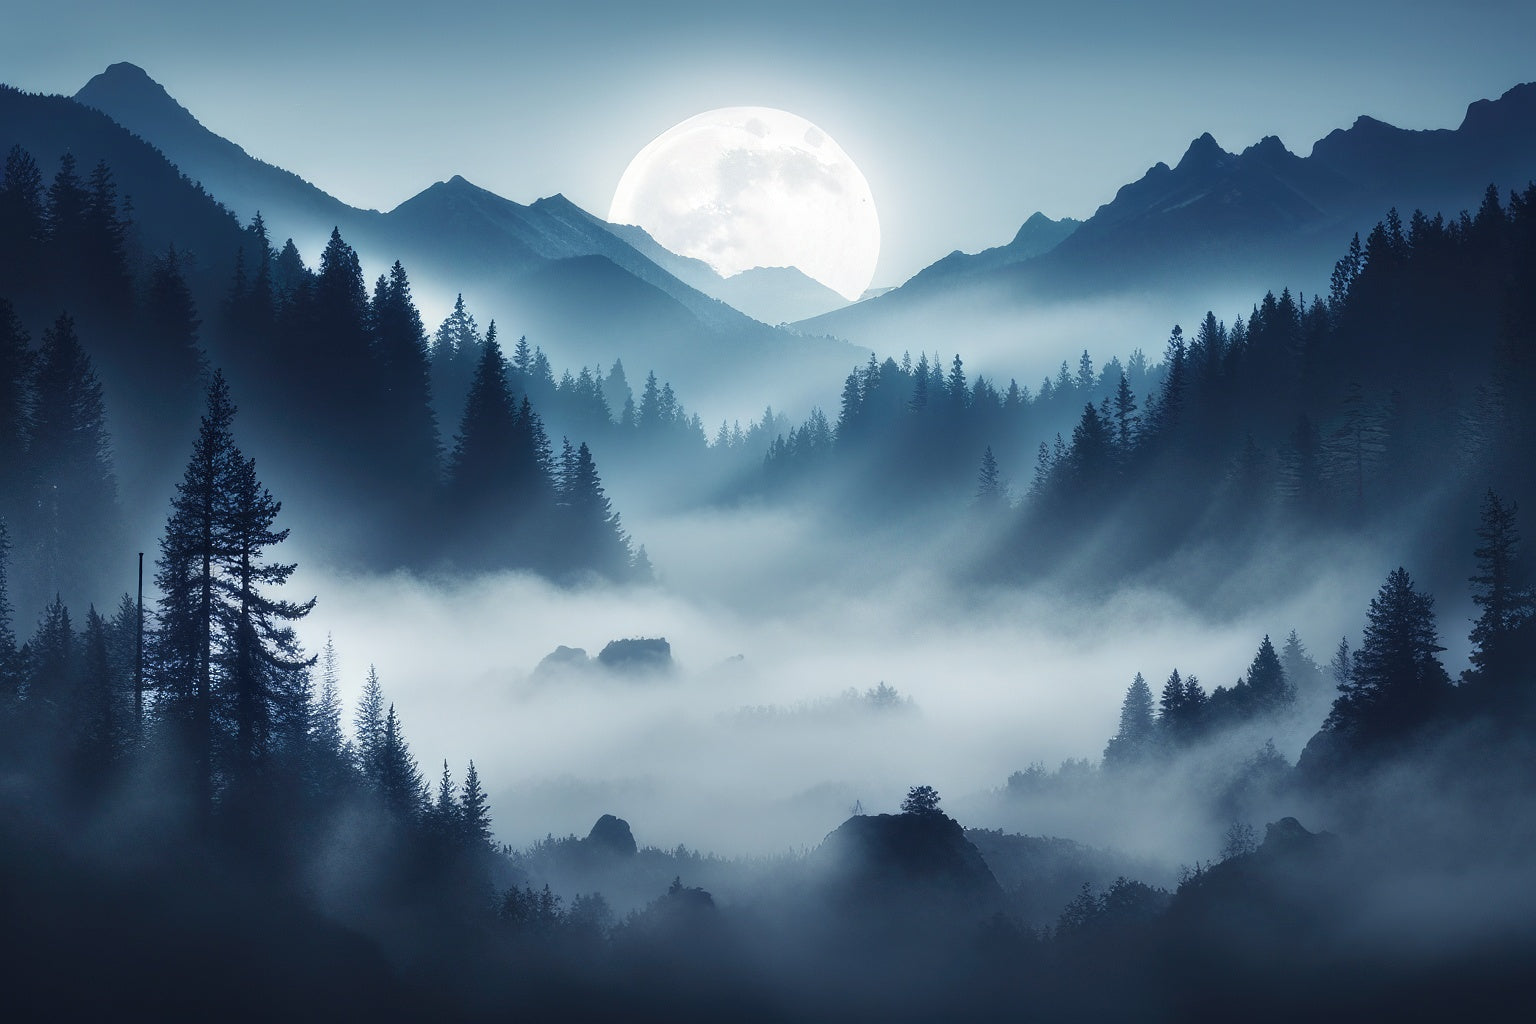 Mountain Forest in The Moonlight Photograph Art Print